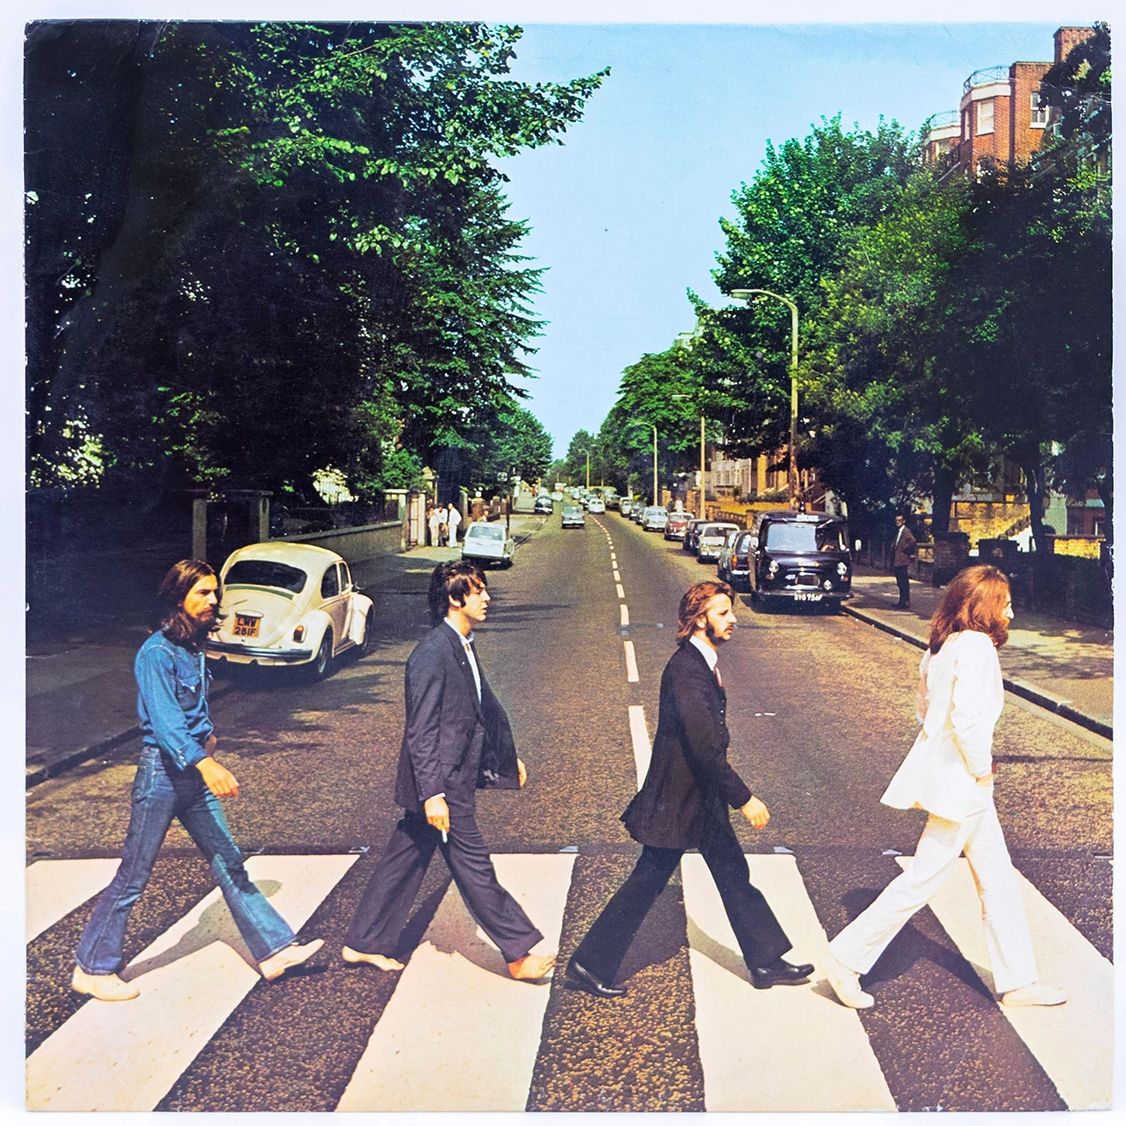 The record cover for The Beatles Abbey Road album